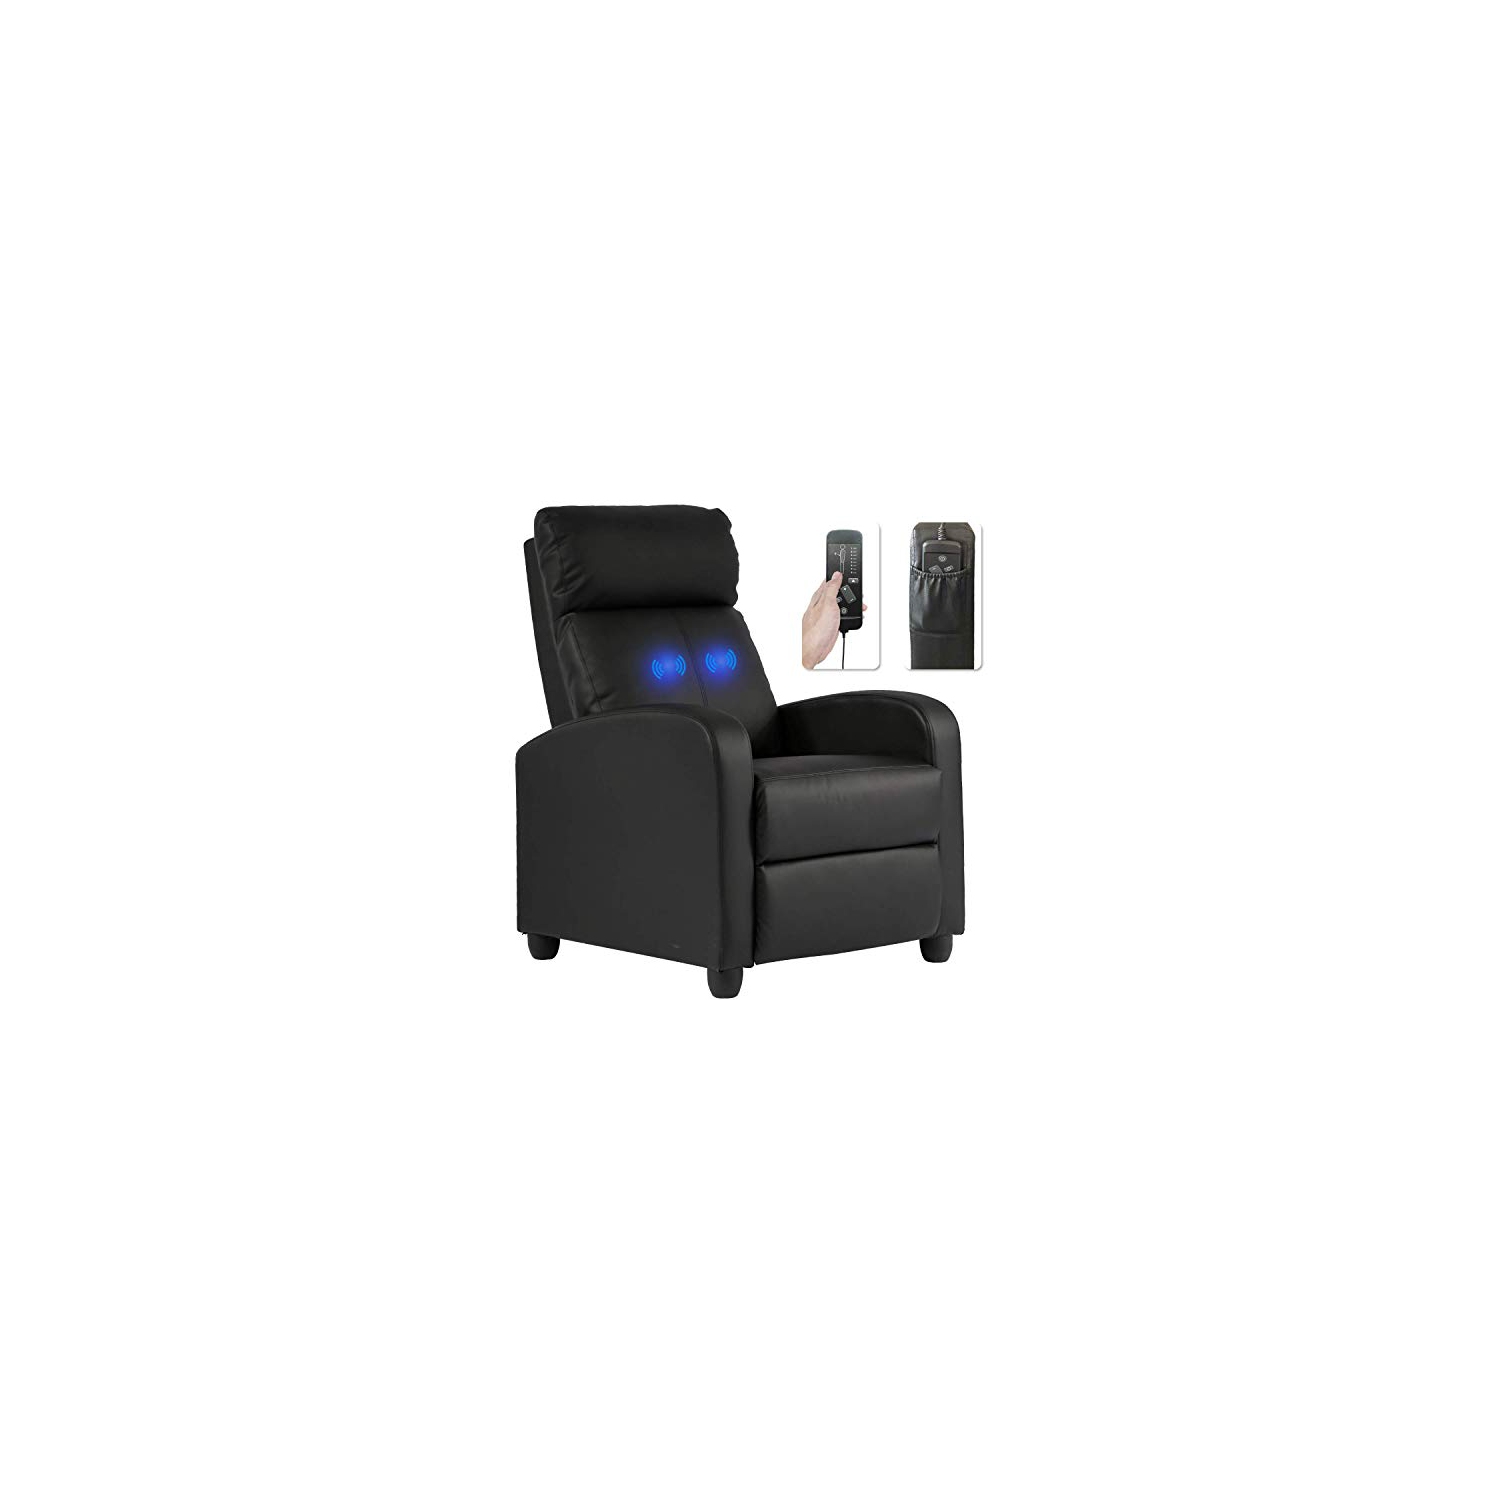 Recliner Chair for Living Room Massage Recliner Sofa Reading Chair Winback Single Sofa Home Theater Seating Modern Reclining Chair Easy Lounge with PU Leather Padded Seat Backrest